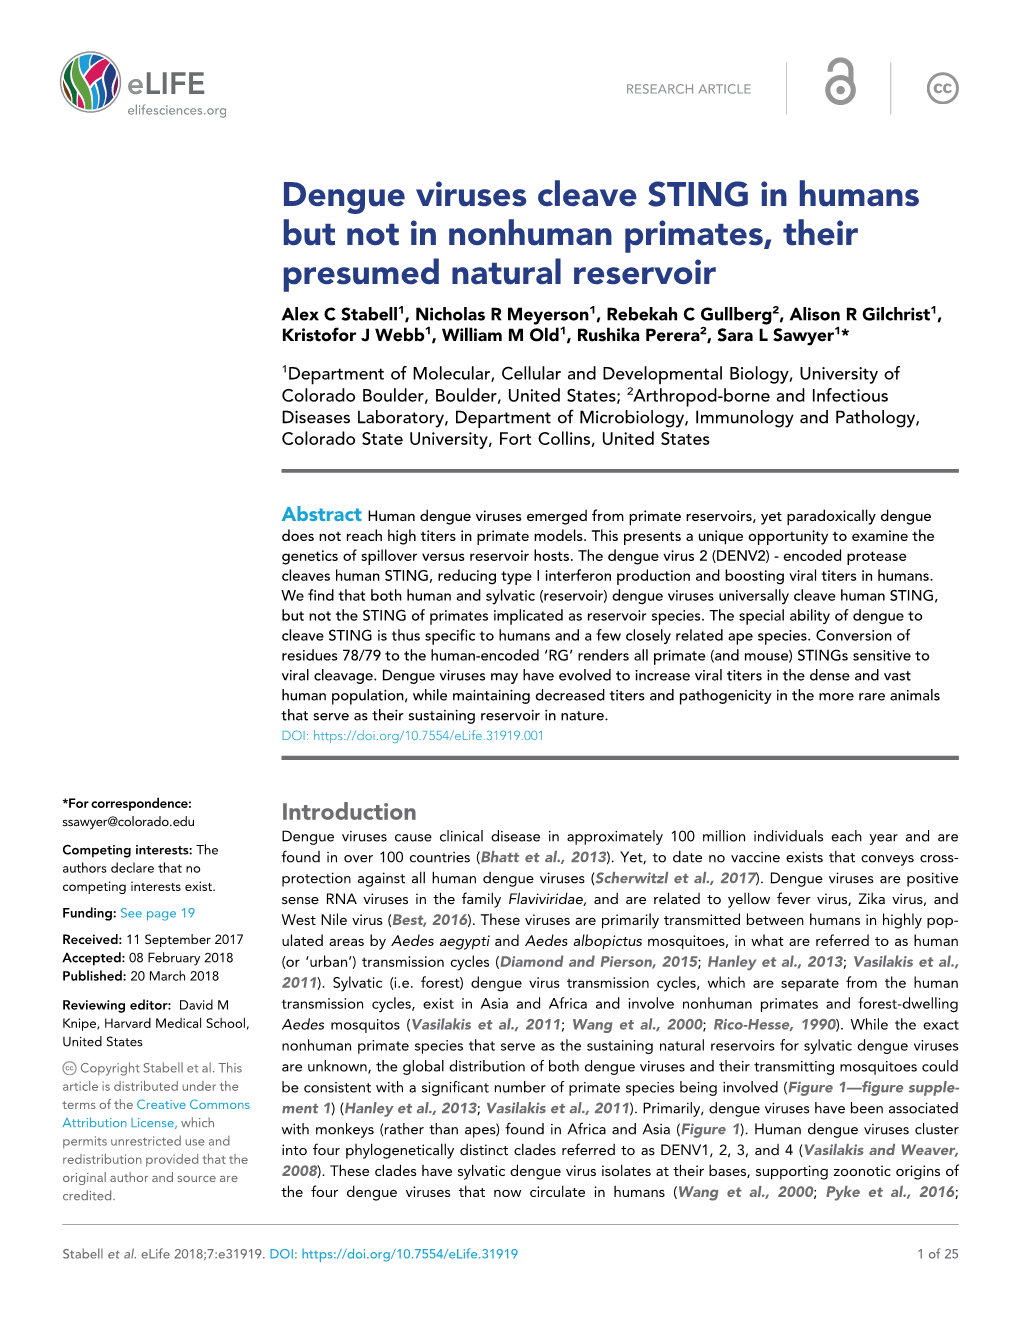 Dengue Viruses Cleave STING in Humans but Not in Nonhuman